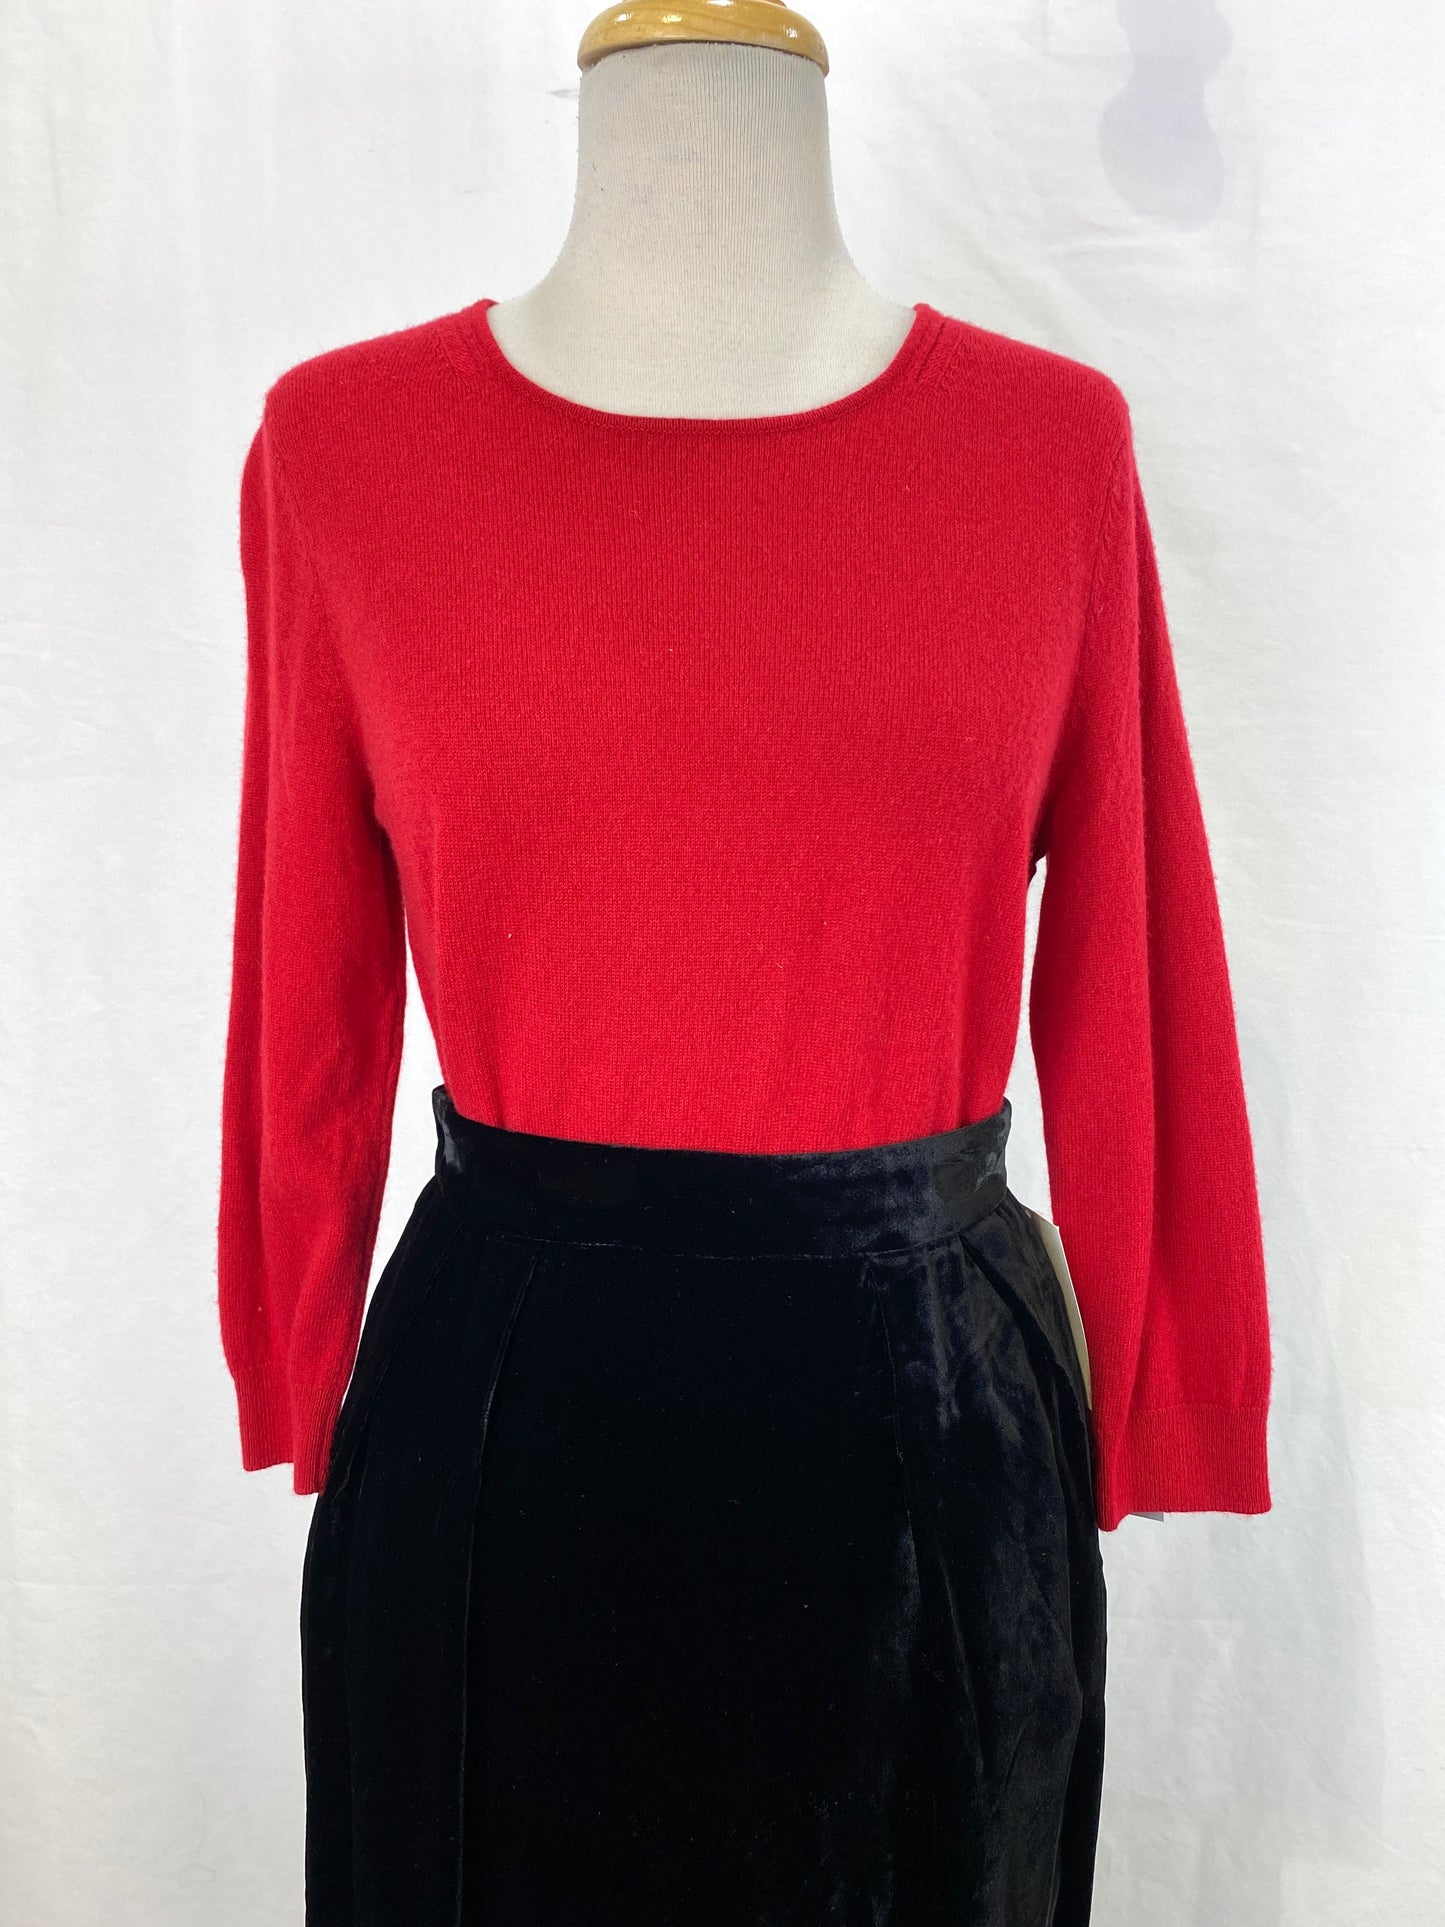 Red cashmere sweater tucked into black skirt on mannequin. Ian Drummond Vintage. 